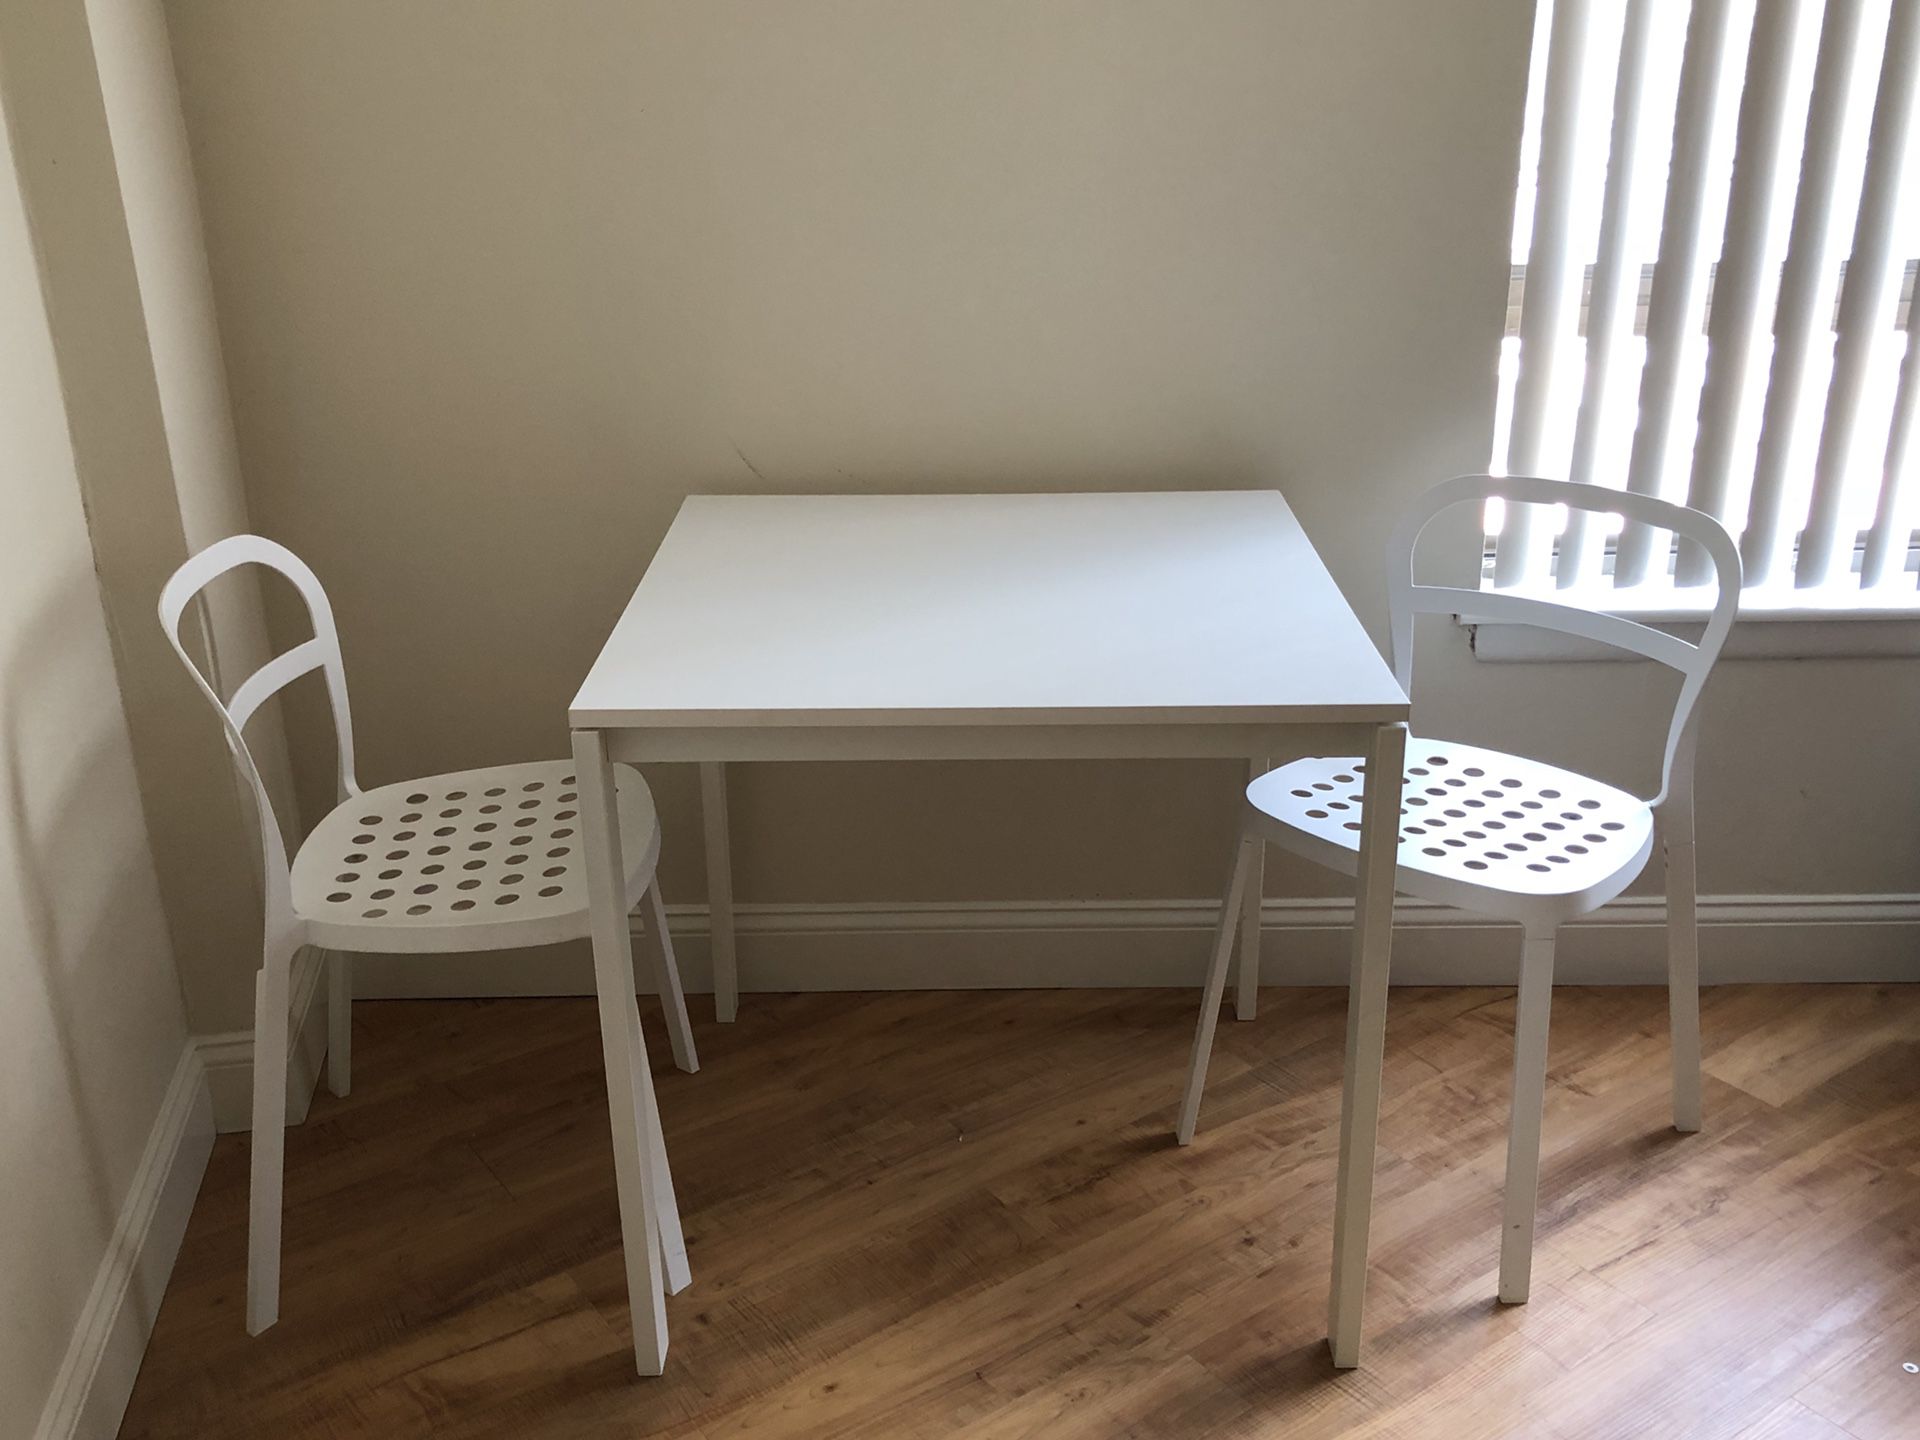 Dinner table and chairs (Ikea)